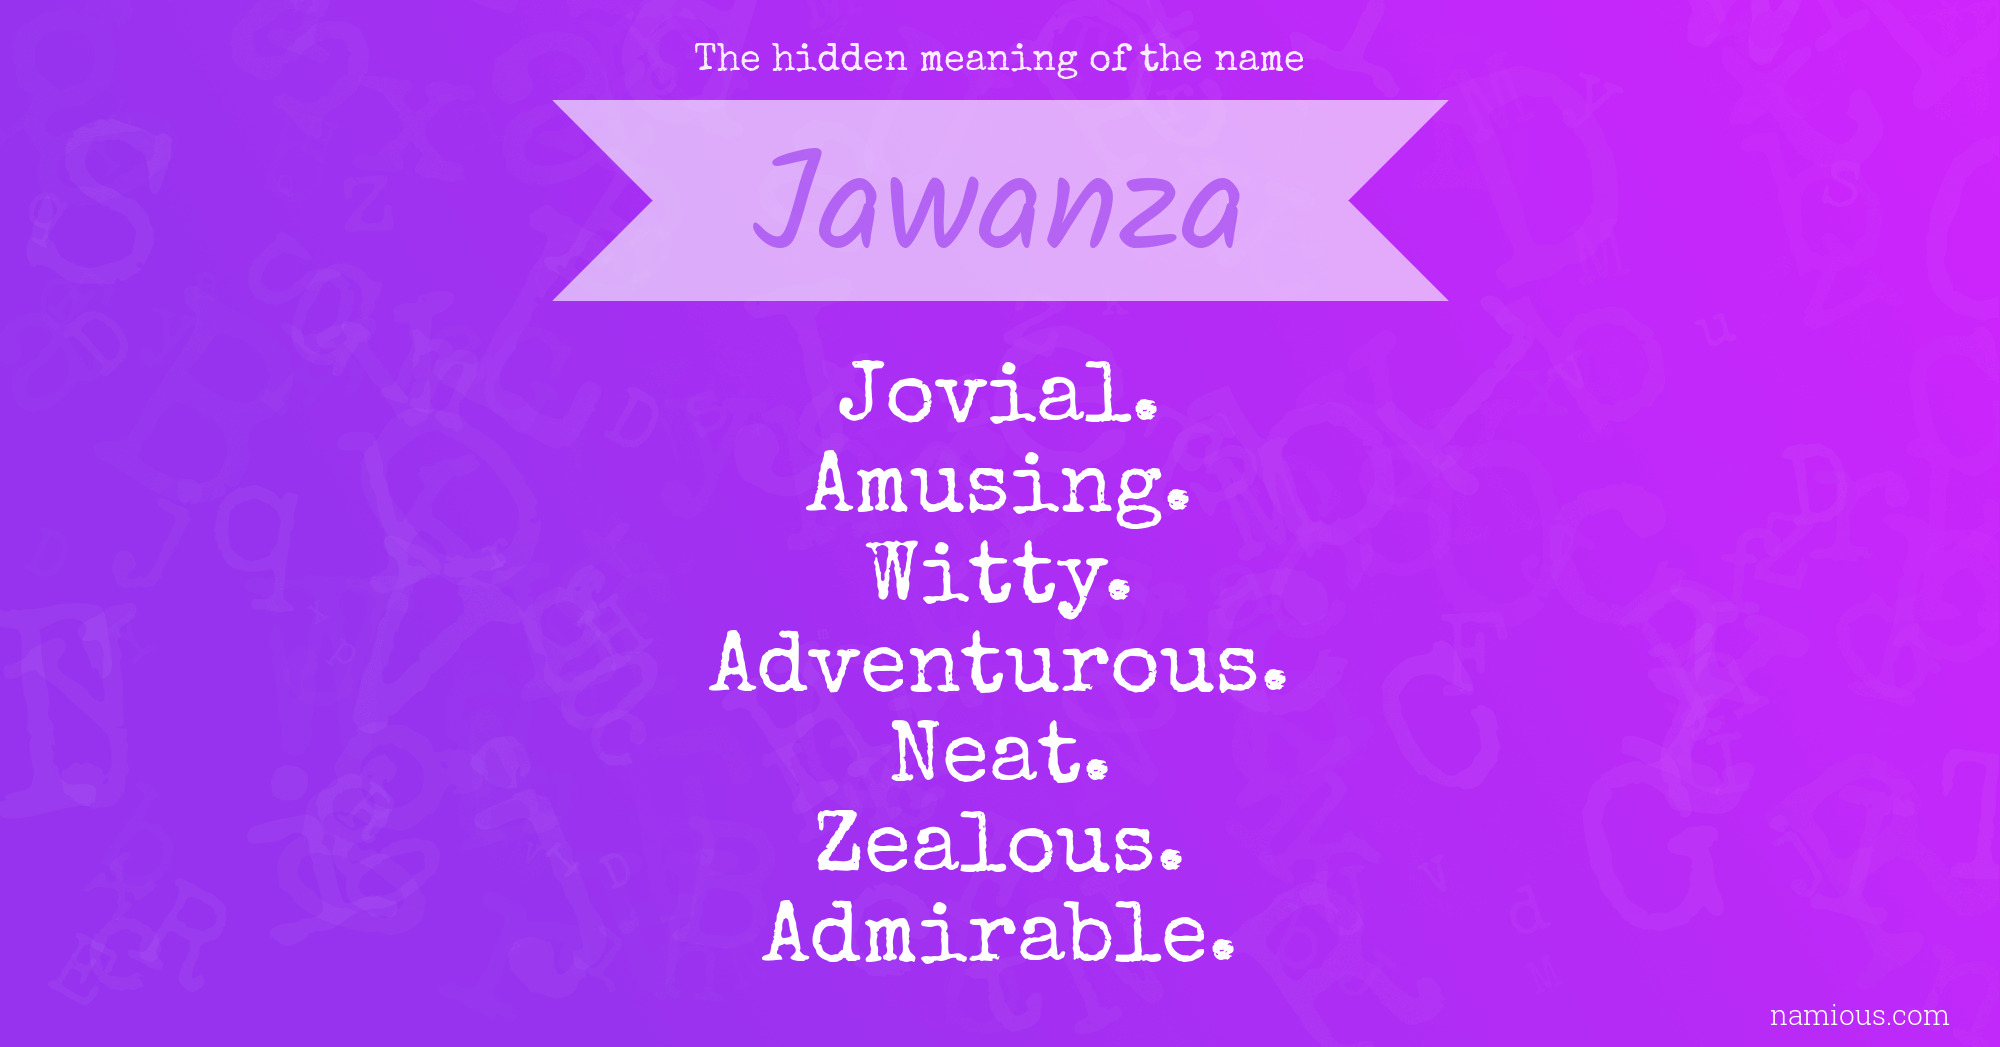 The hidden meaning of the name Jawanza